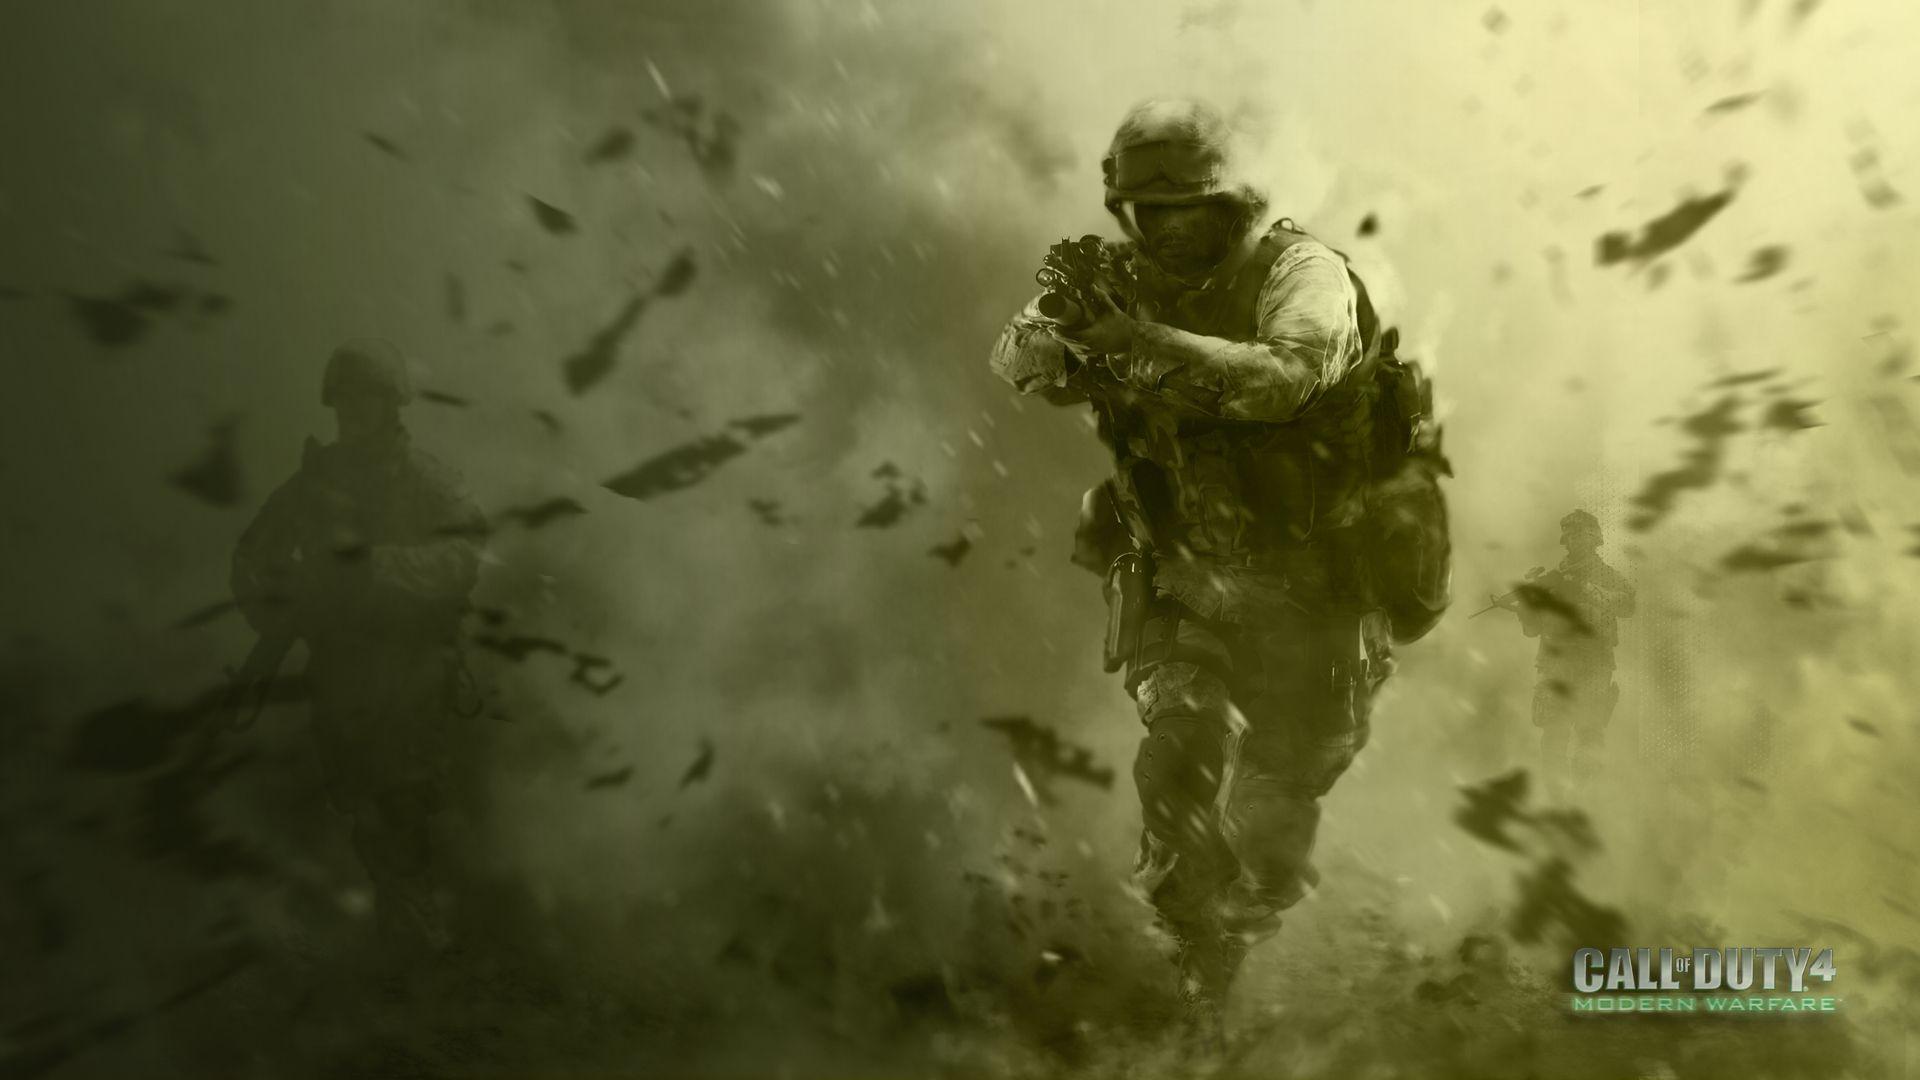 Call of Duty Modern Warfare HD Wallpapers and 4K Backgrounds